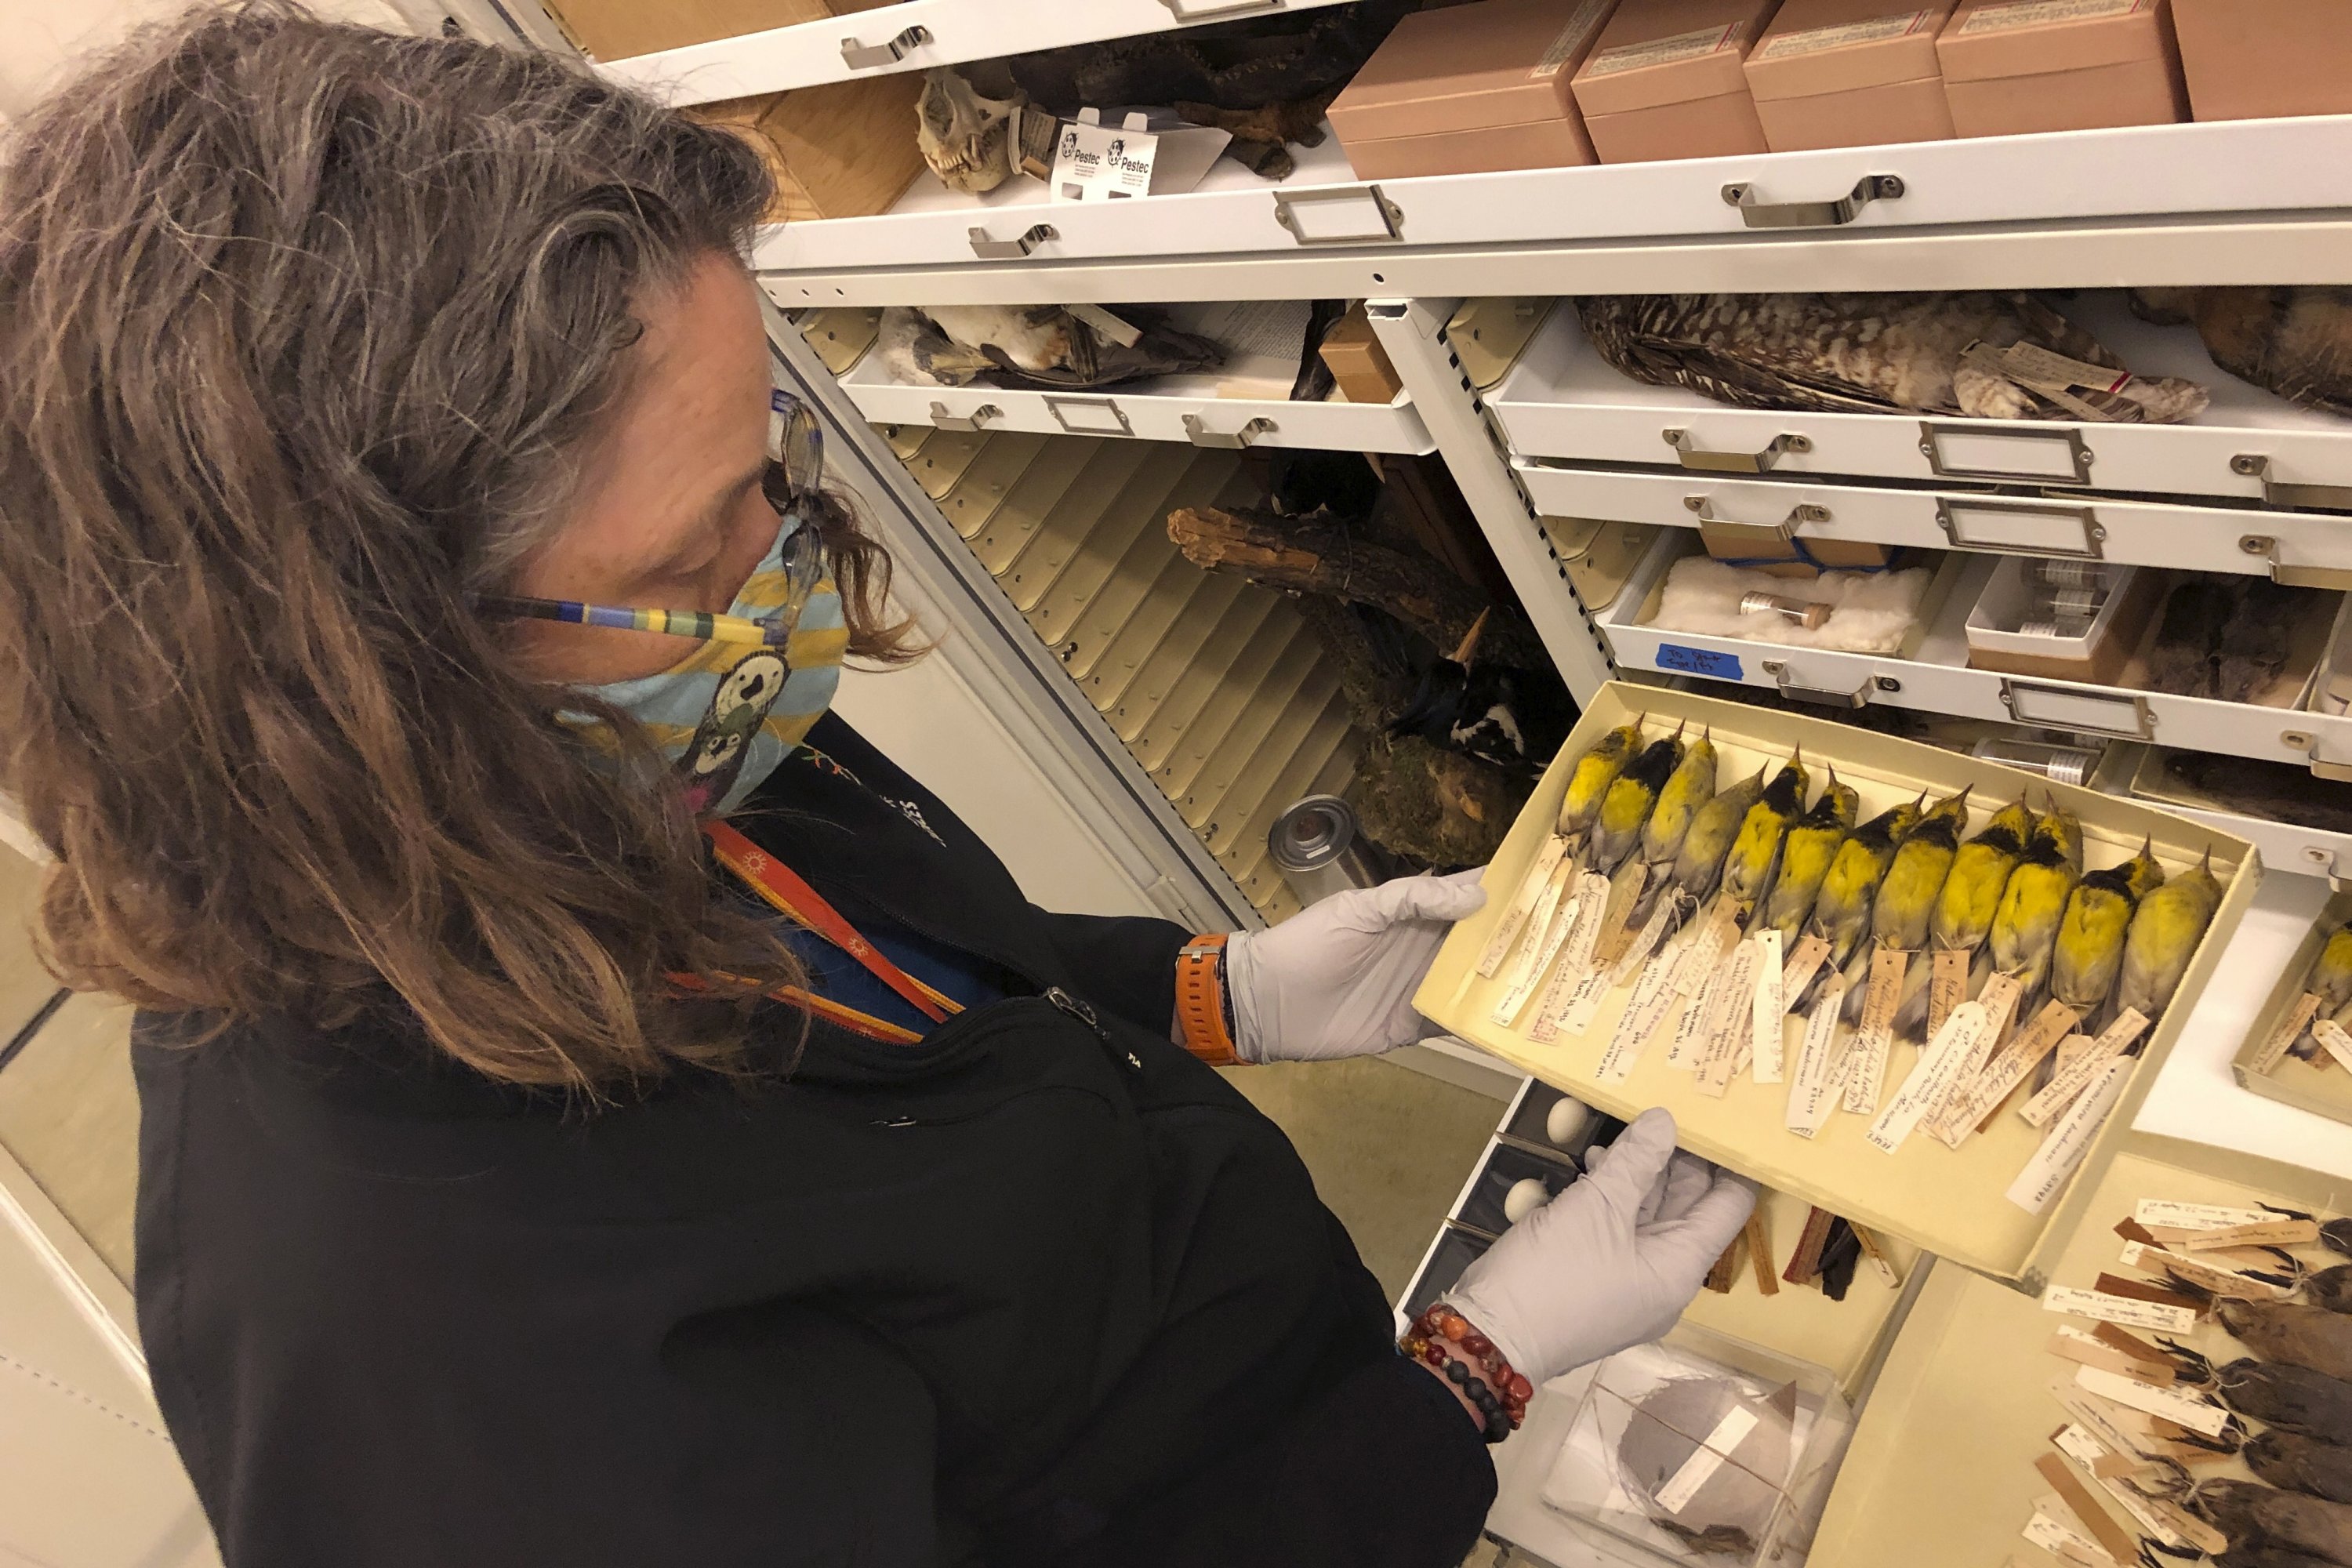 Moe Flannery, senior collections manager for ornithology and mammalogy at the California Academy of Sciences, holds a tray containing Bachman's warblers in their specimen collection in San Francisco, U.S., Sept. 24, 2021. (AP Photo)